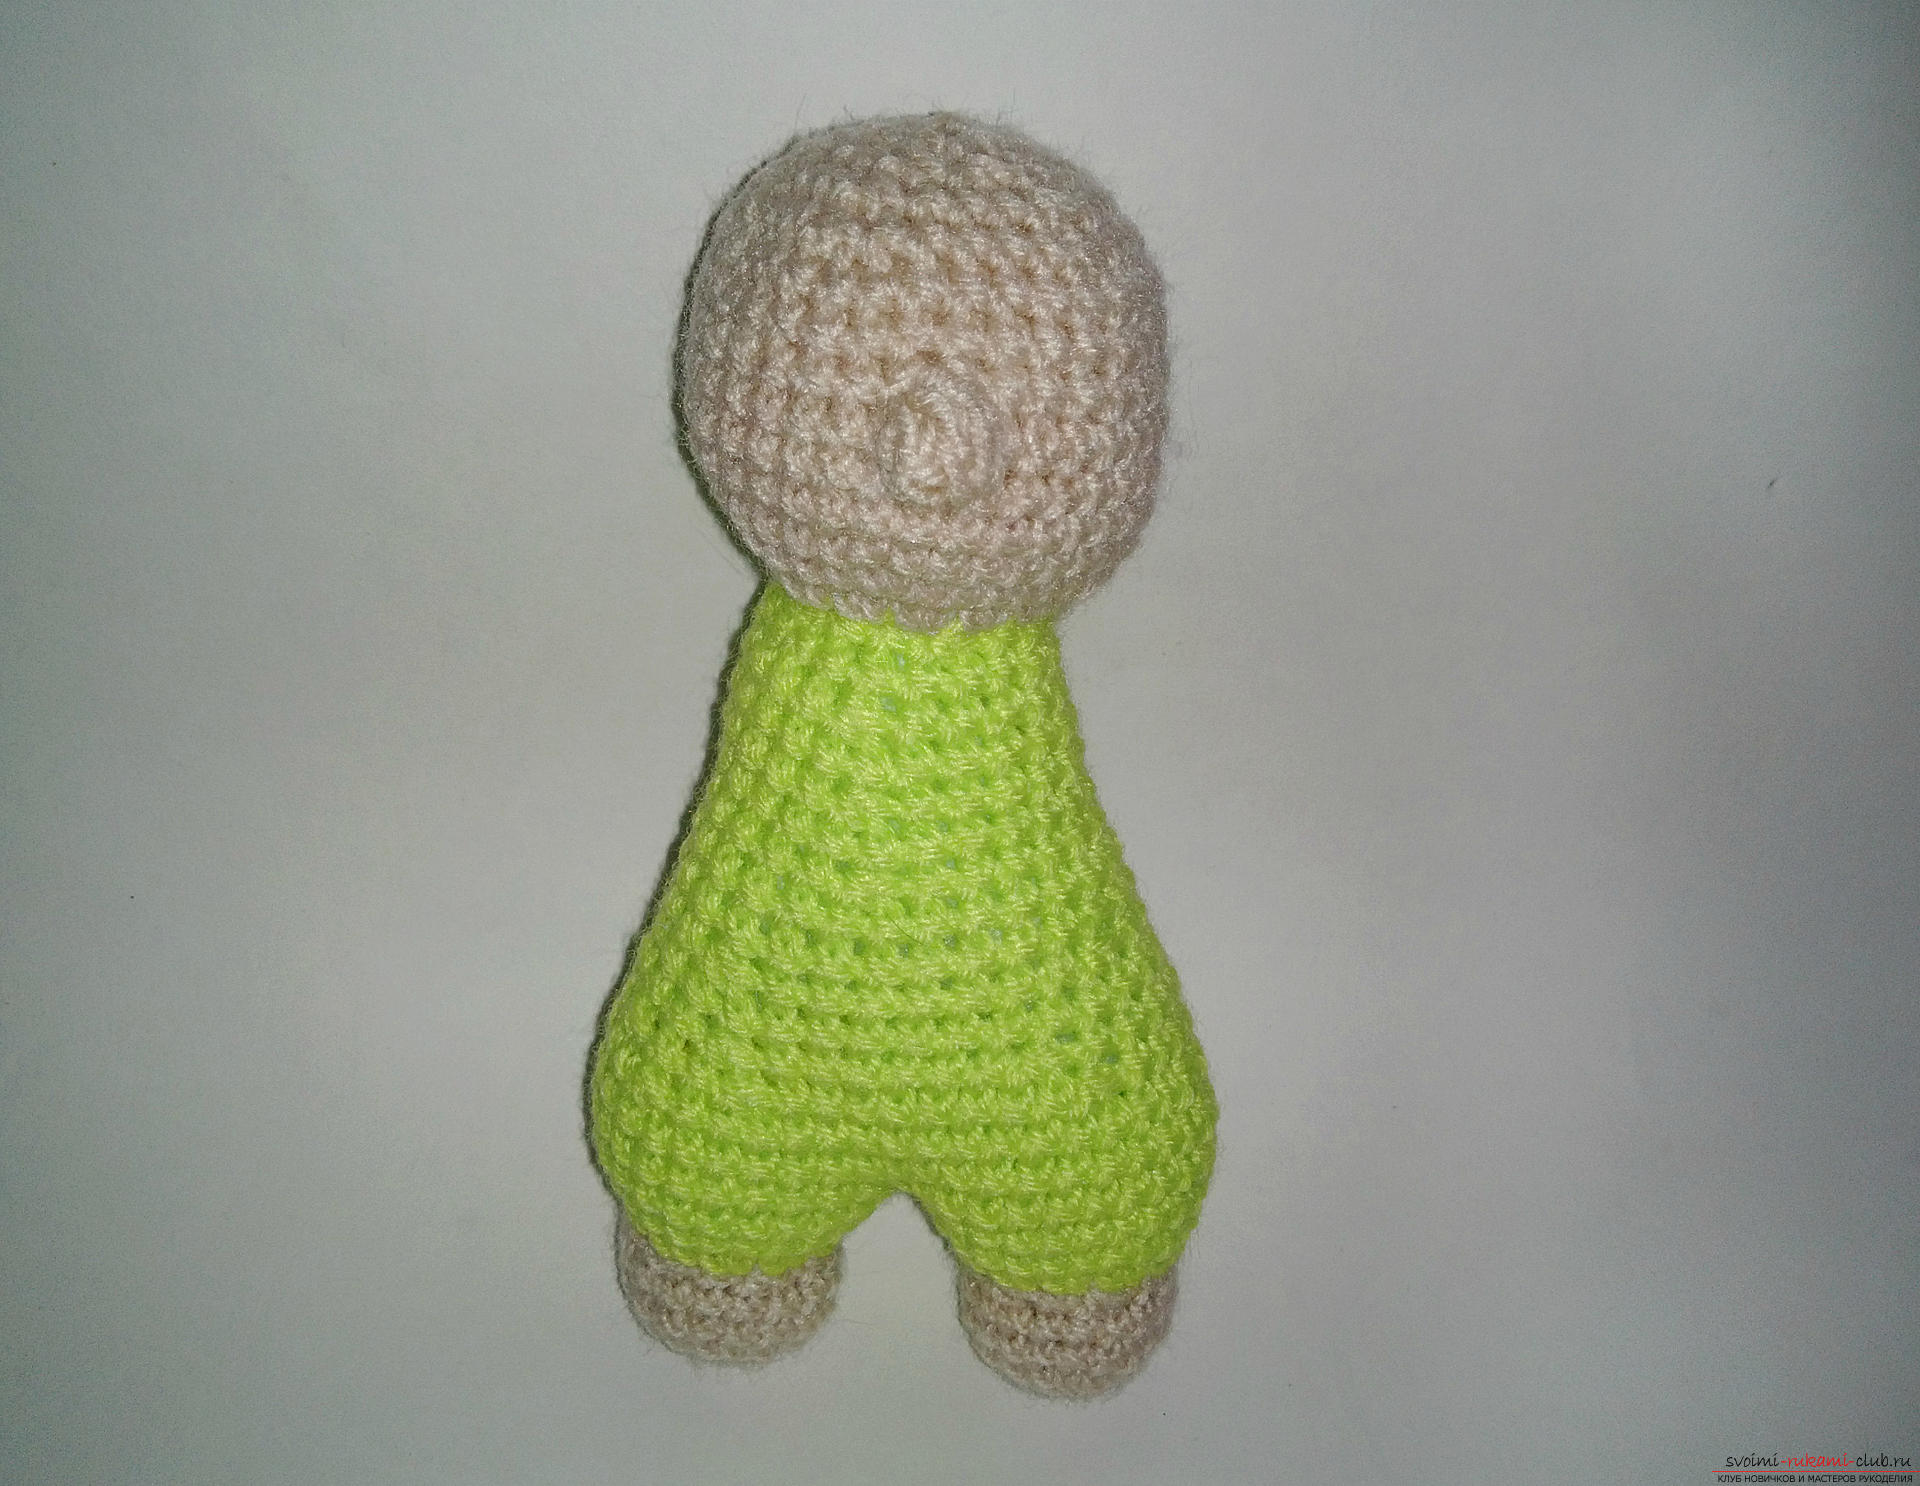 A master class with a photo and description will teach you how to tie a crocheted dwarf toy. Picture №10